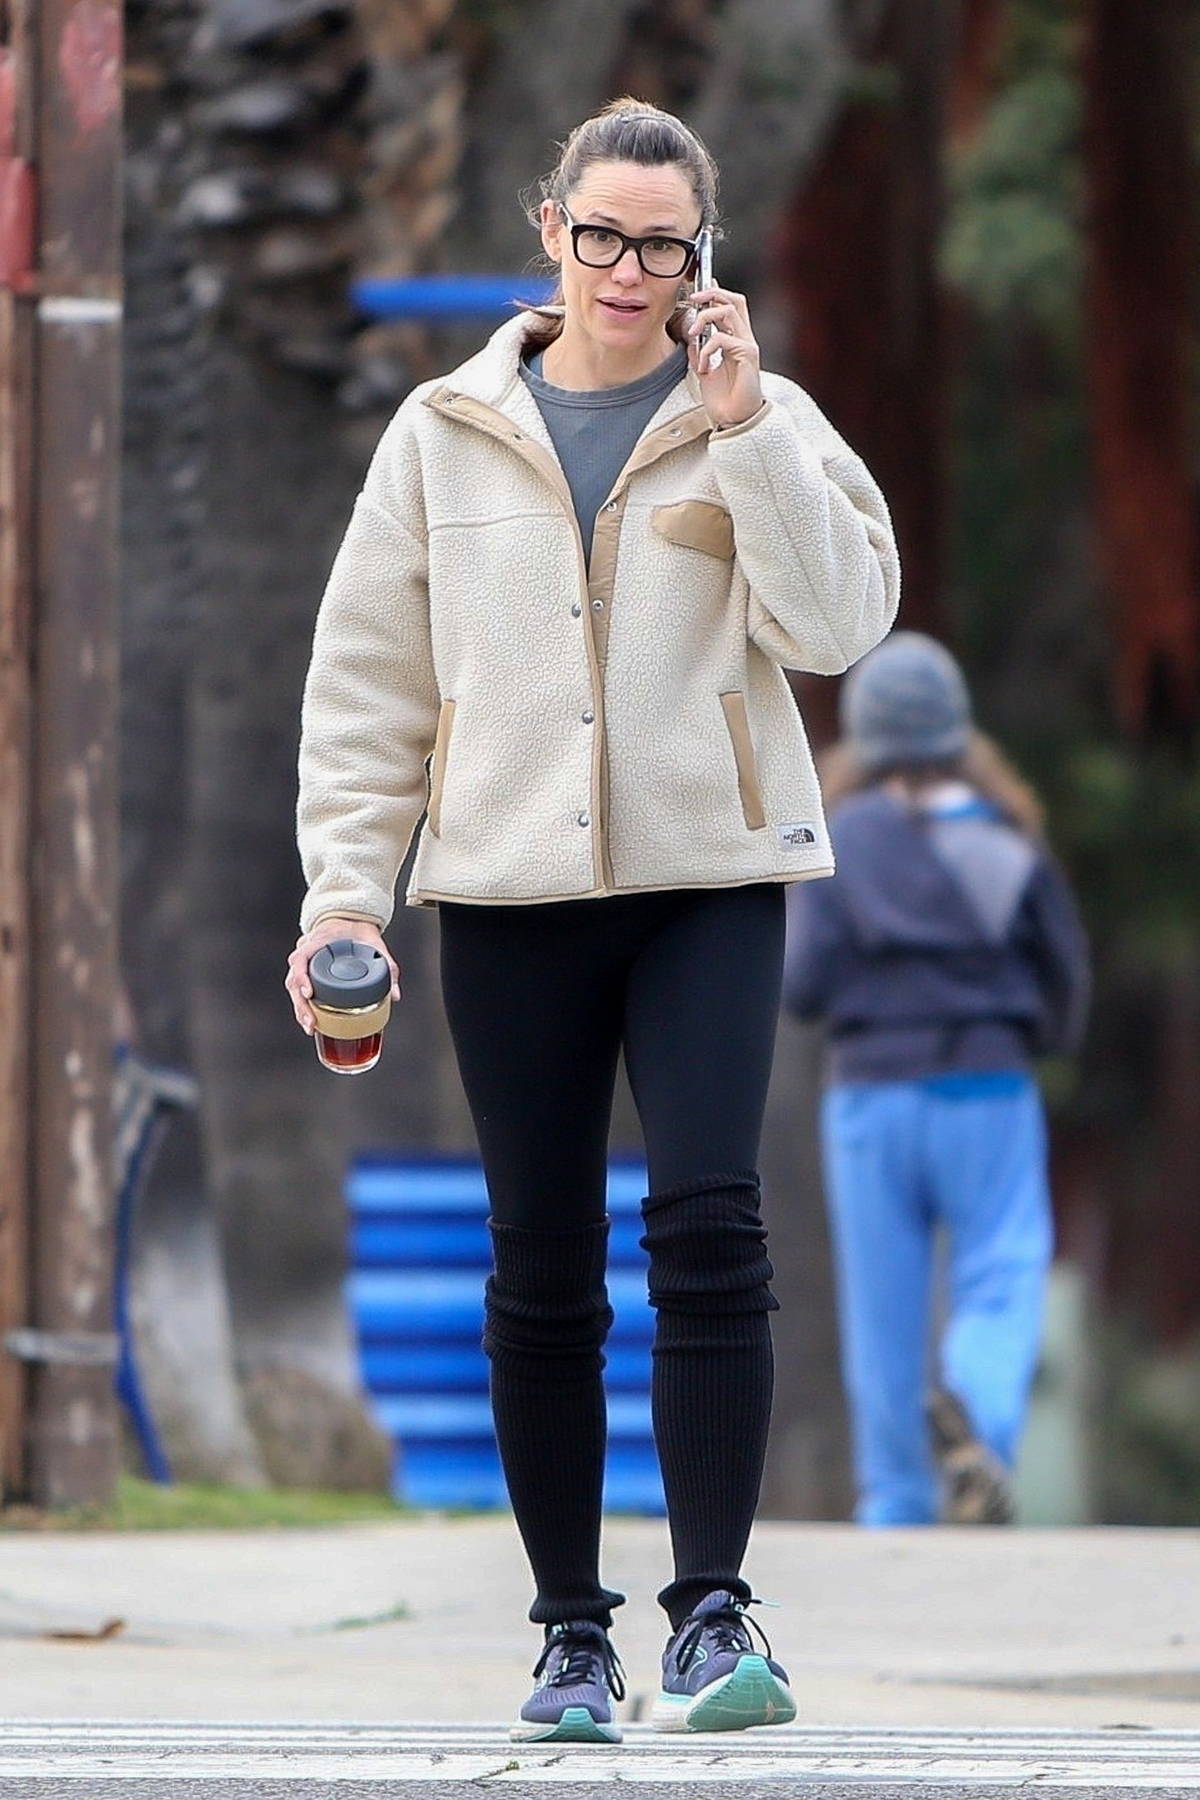 https://www.celebsfirst.com/wp-content/uploads/2022/04/jennifer-garner-wears-a-teddy-jacket-with-leggings-and-leg-warmers-while-out-on-a-walk-in-brentwood-california-010422_2.jpg